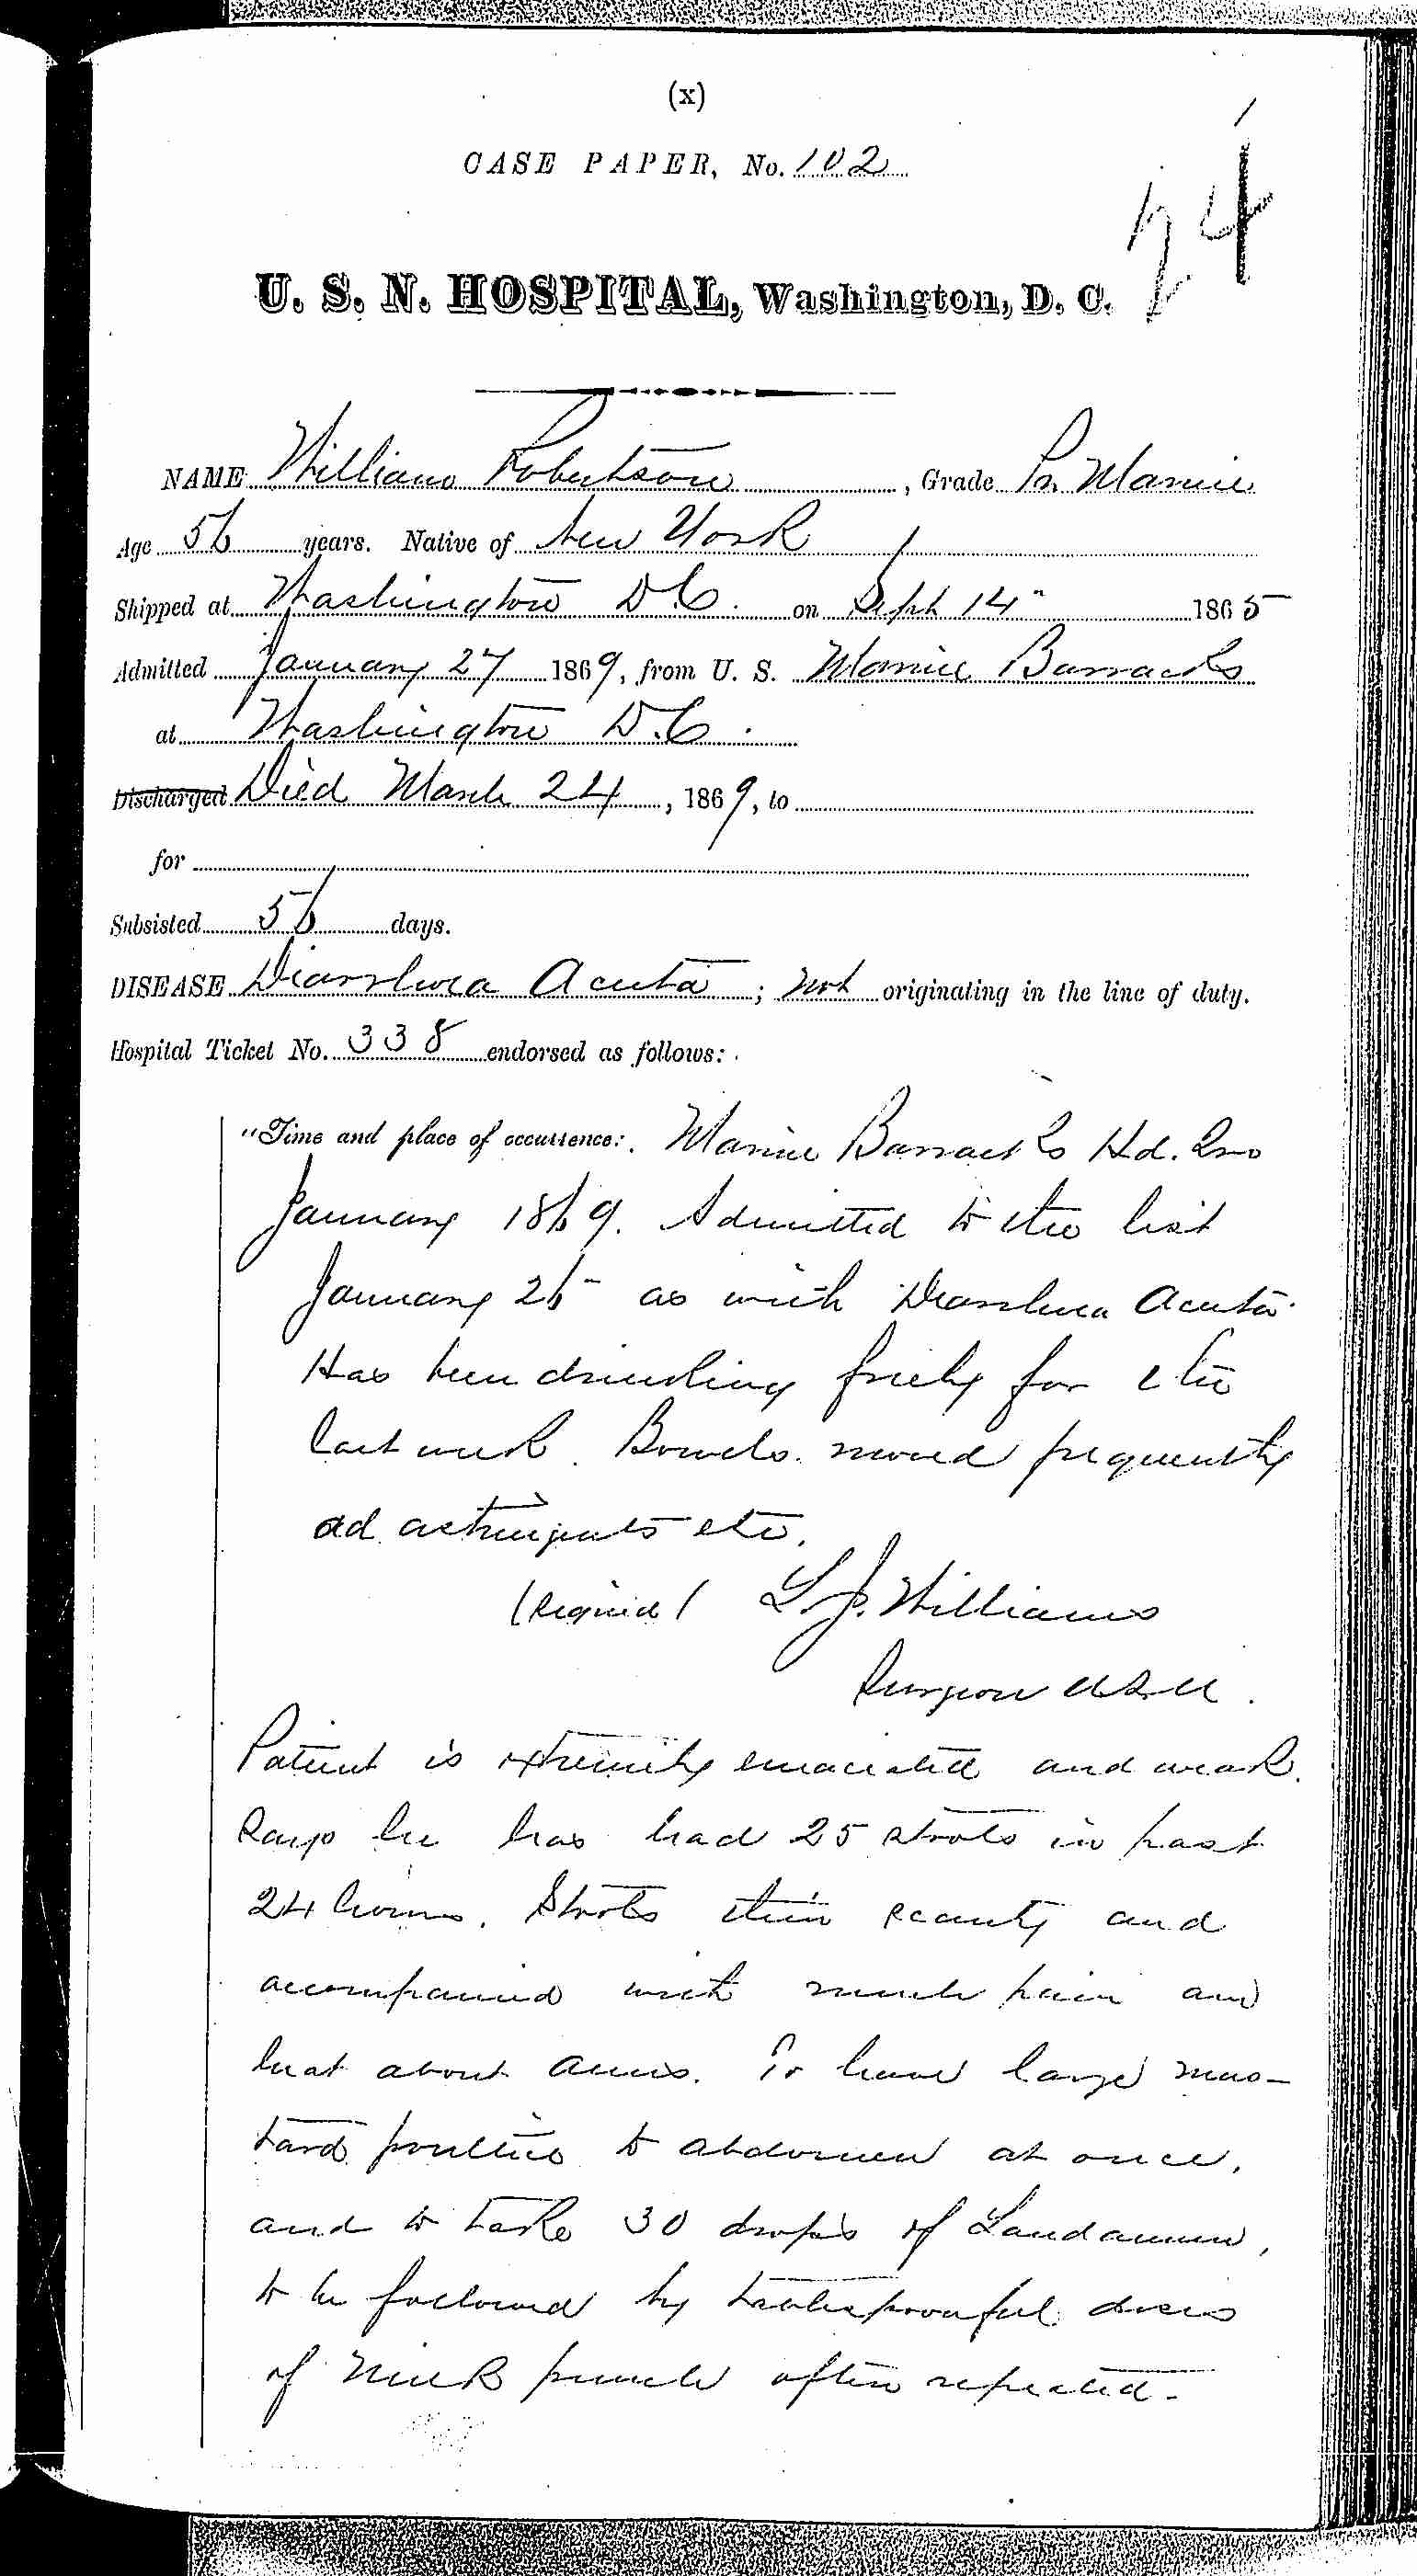 Entry for William Robertson (page 1 of 5) in the log Hospital Tickets and Case Papers - Naval Hospital - Washington, D.C. - 1868-69